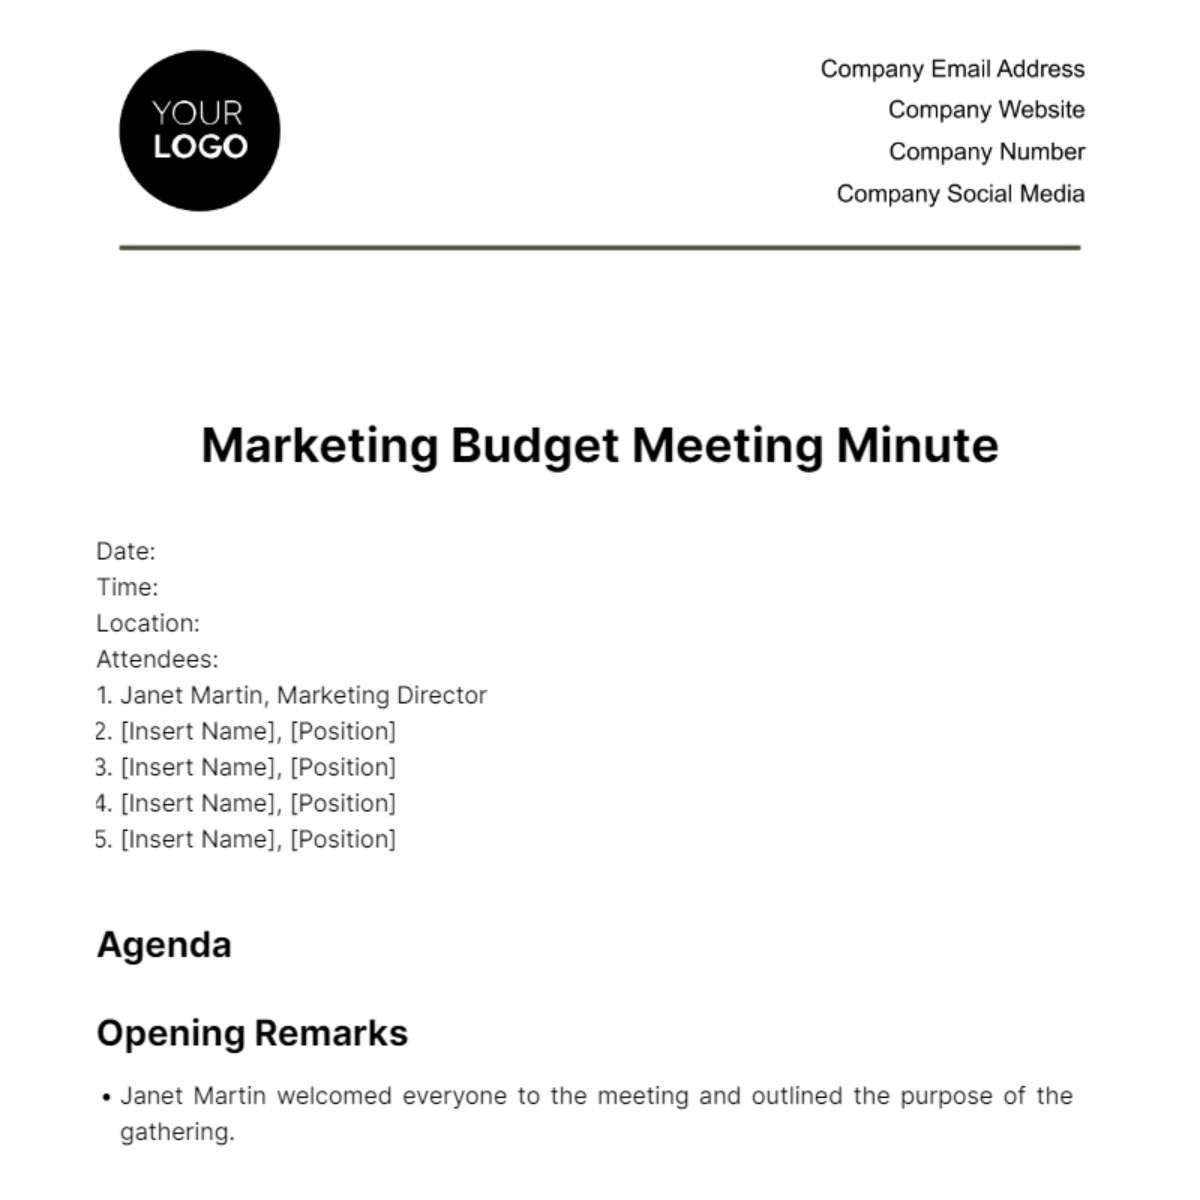 Free Marketing Budget Meeting Minute Template